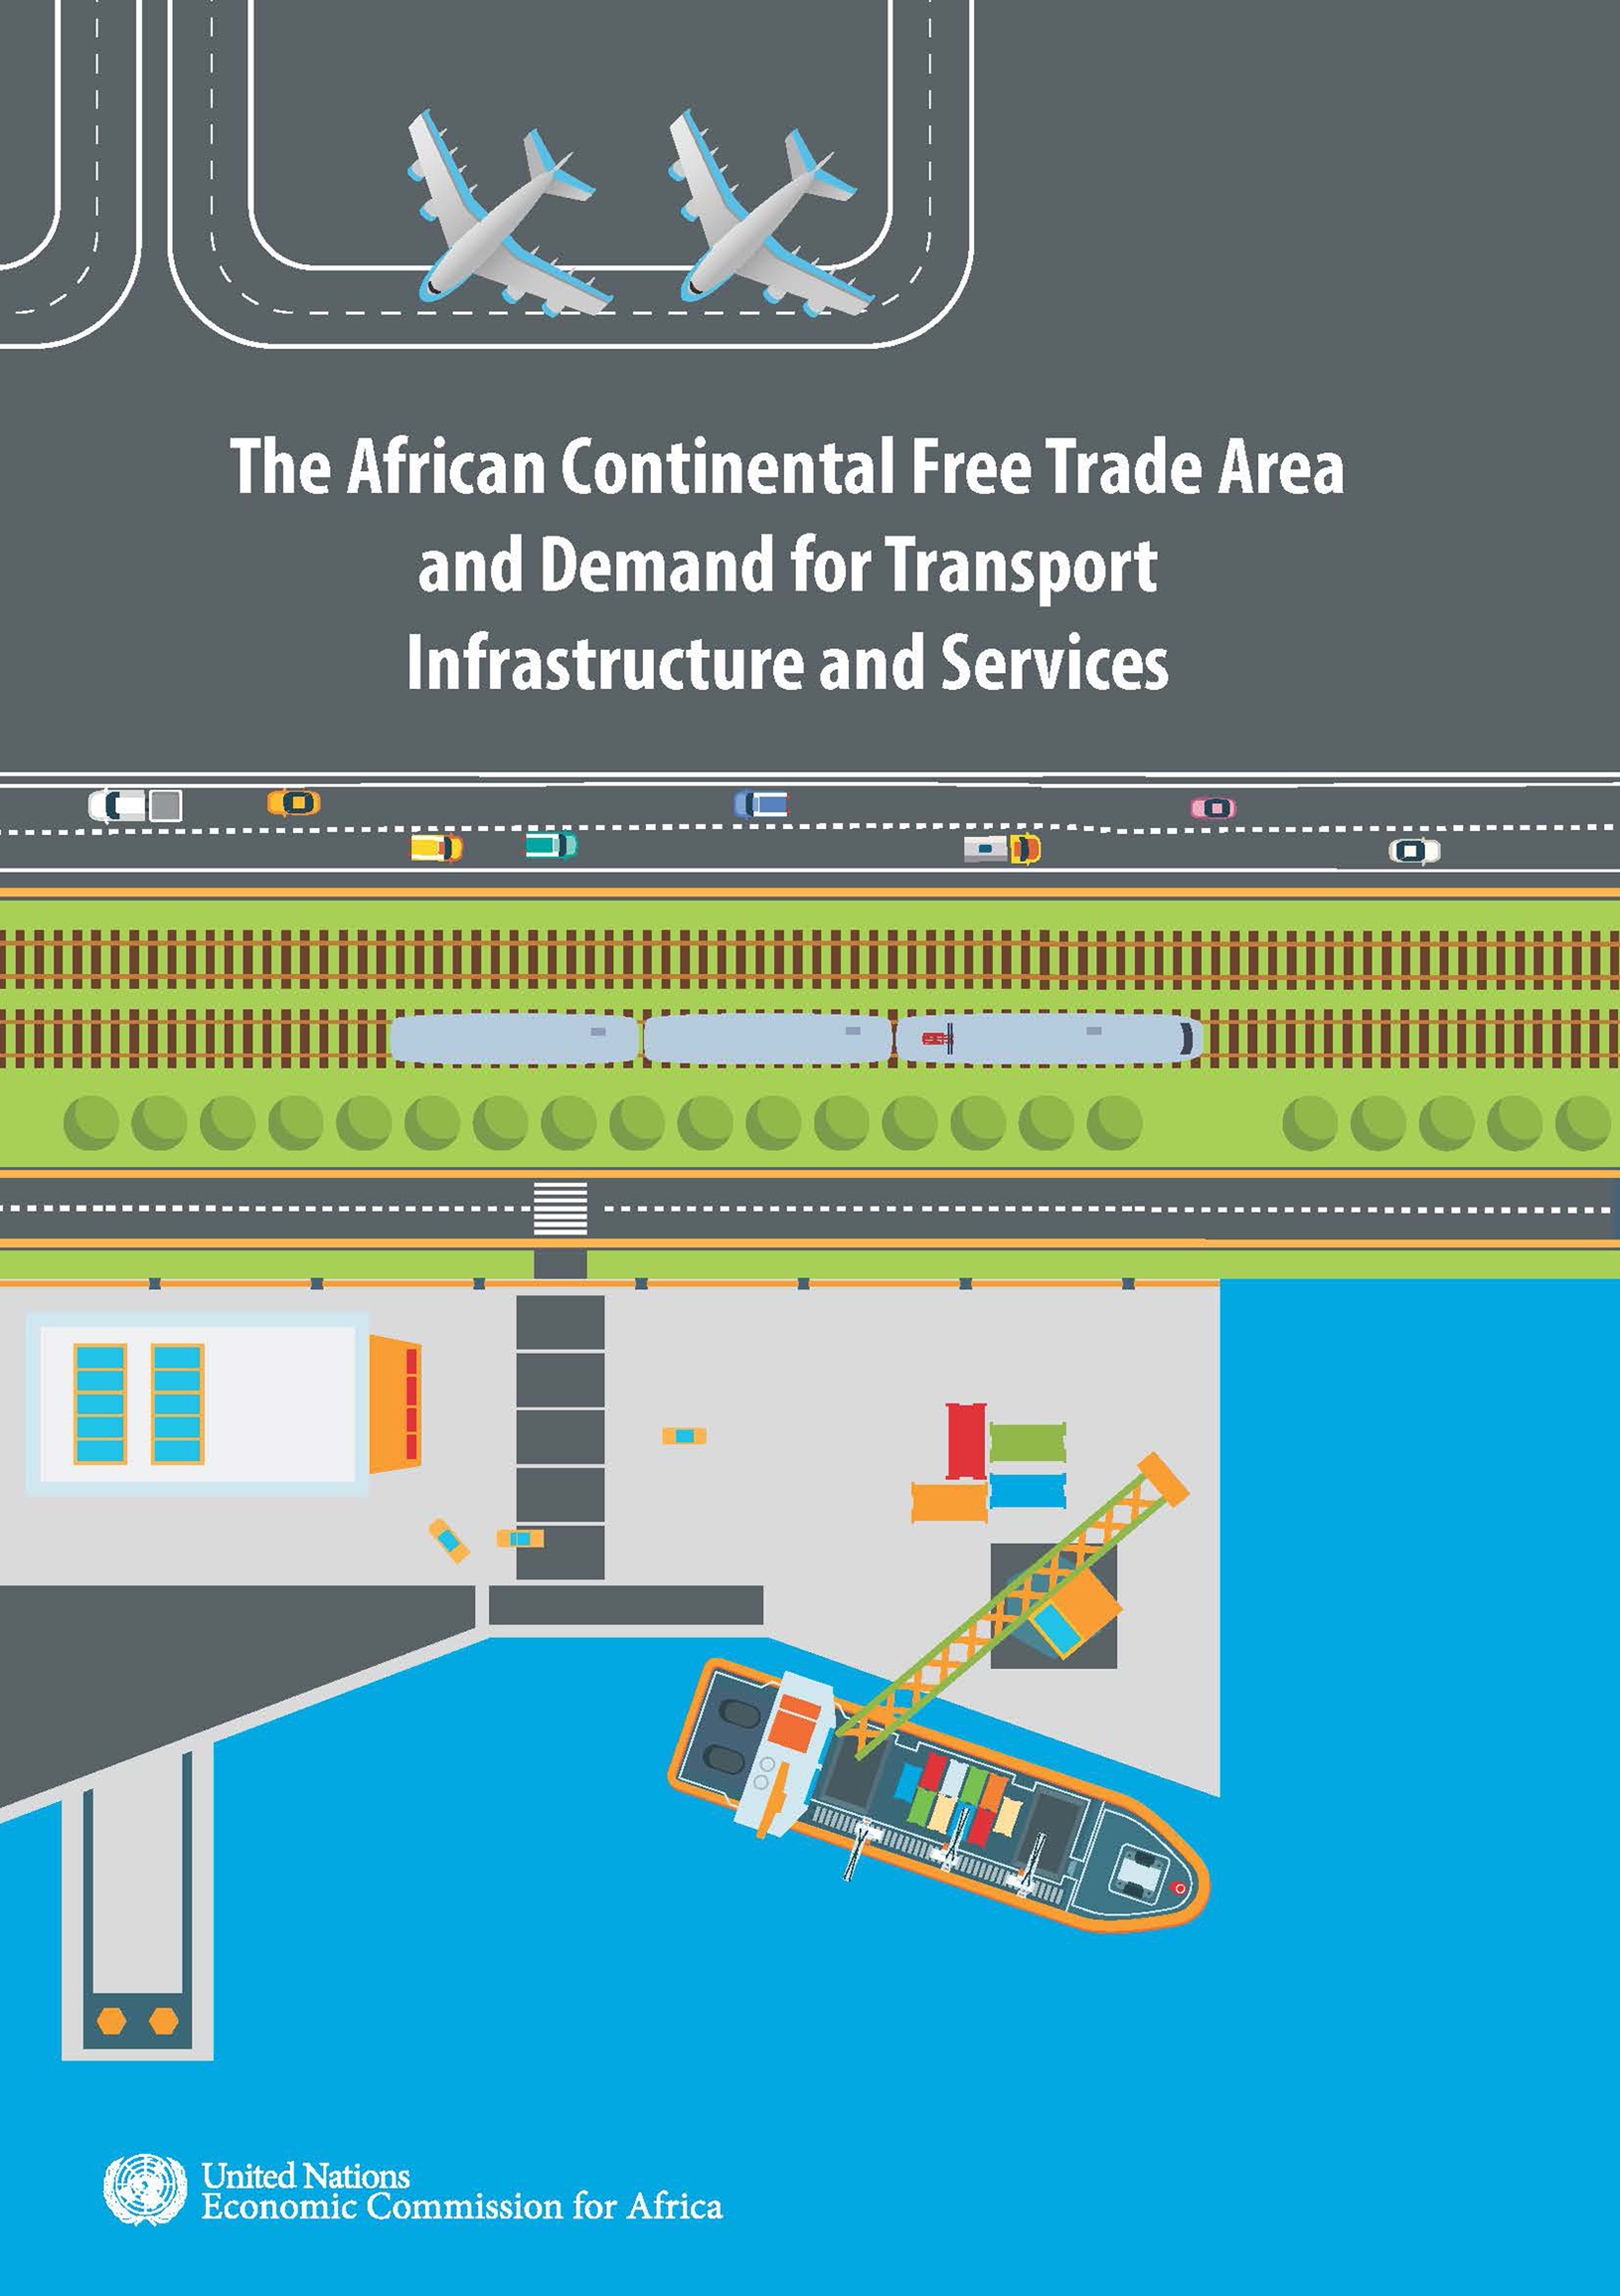 image of Road transport infrastructure and services